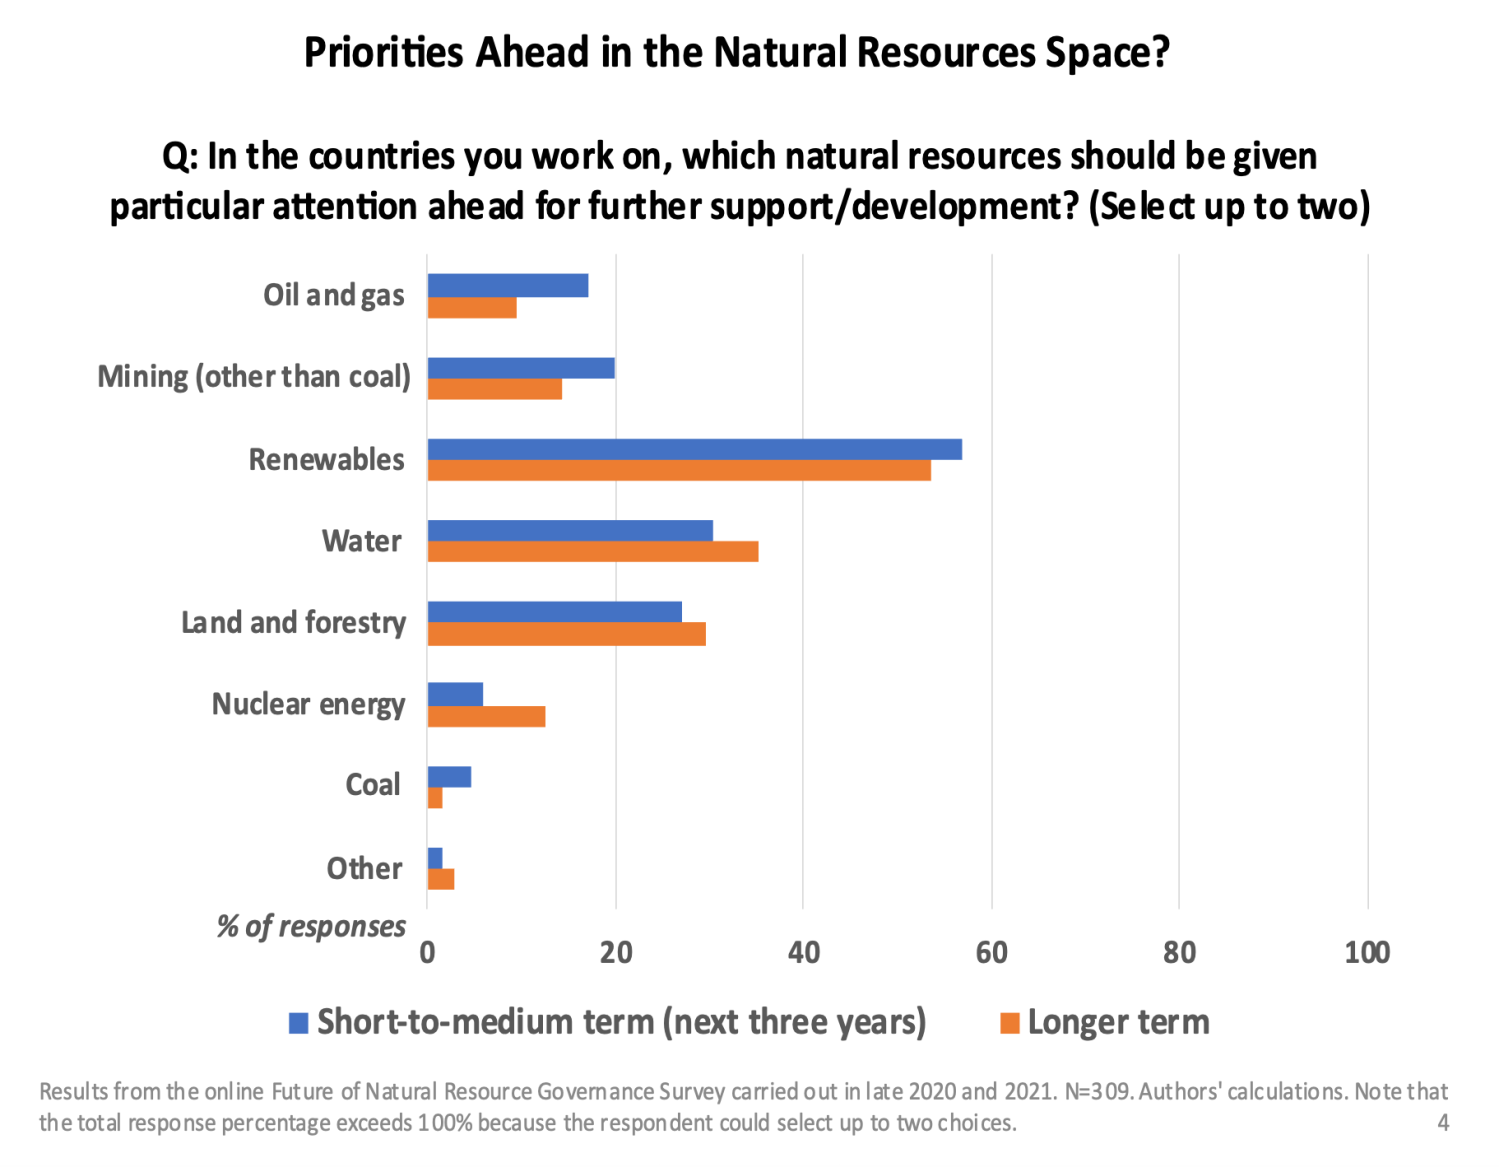 According to respondents, renewables are the highest priority in the short and long term.